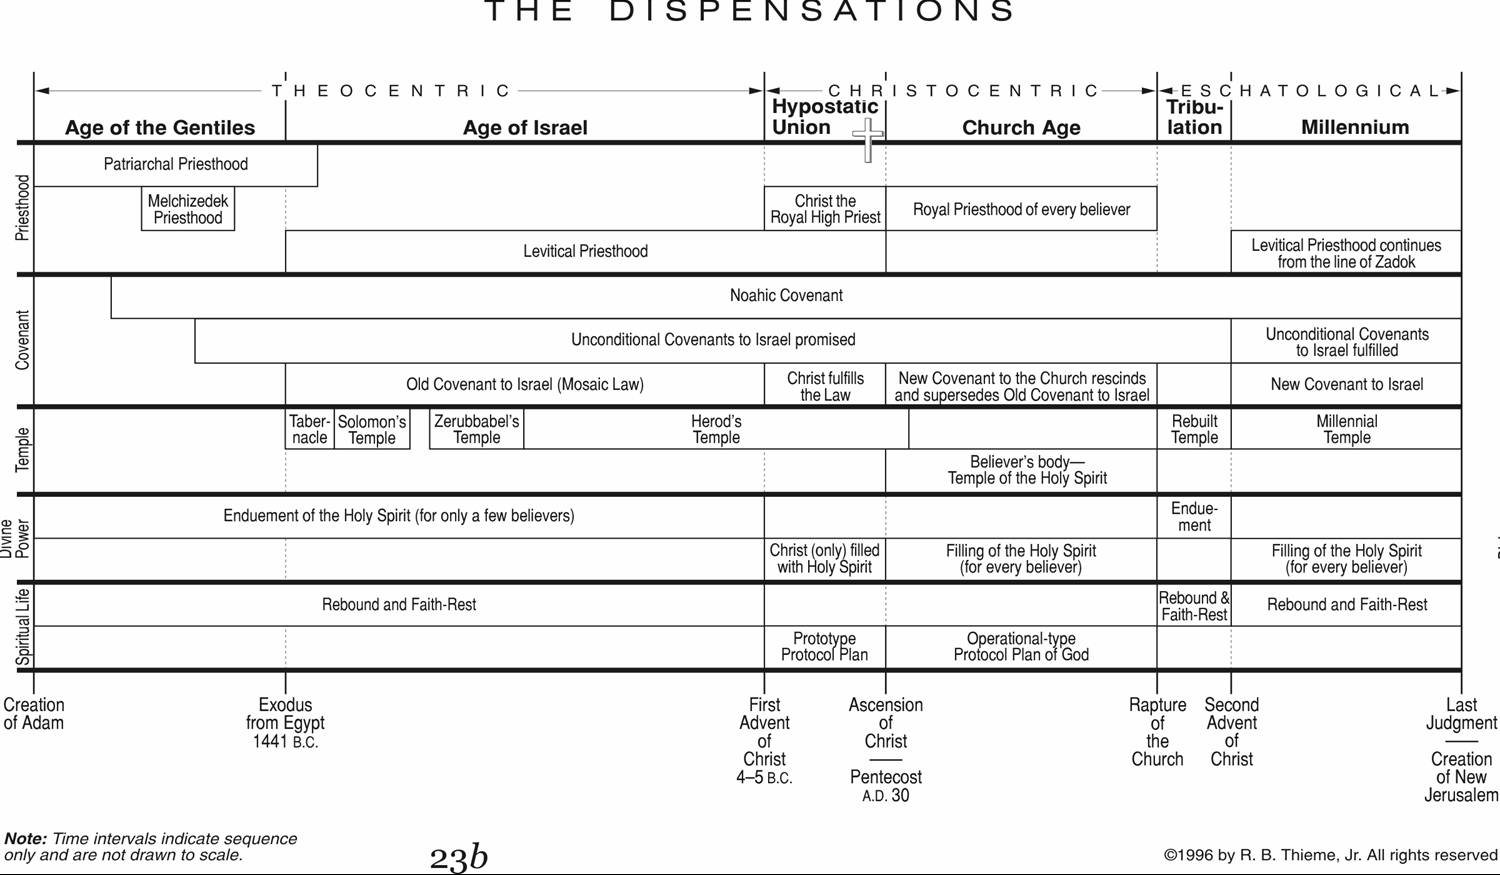 THE PEDESTRIAN CHRISTIAN : One of My Favortie Dispensational Charts